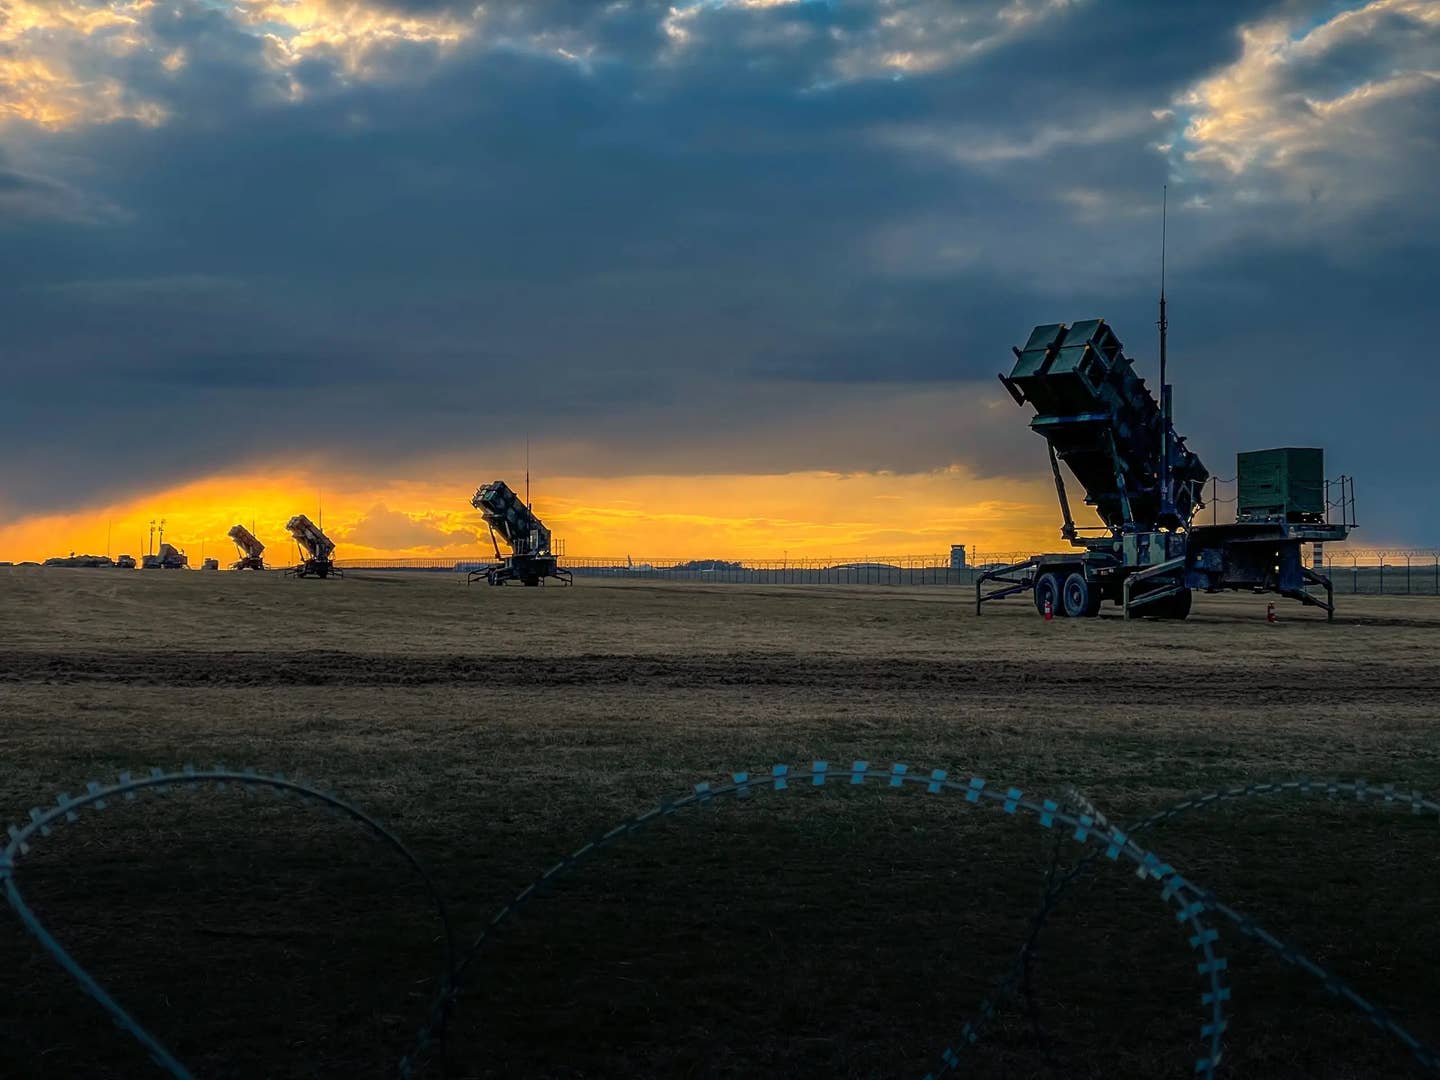 U.S. Patriot missile batteries from the 5th Battalion, 7th Air Defense Artillery Regiment stand ready at sunset in Poland on April 10, 2022. <em>U.S. Army photo by Sgt. 1st Class Christopher Smith</em>